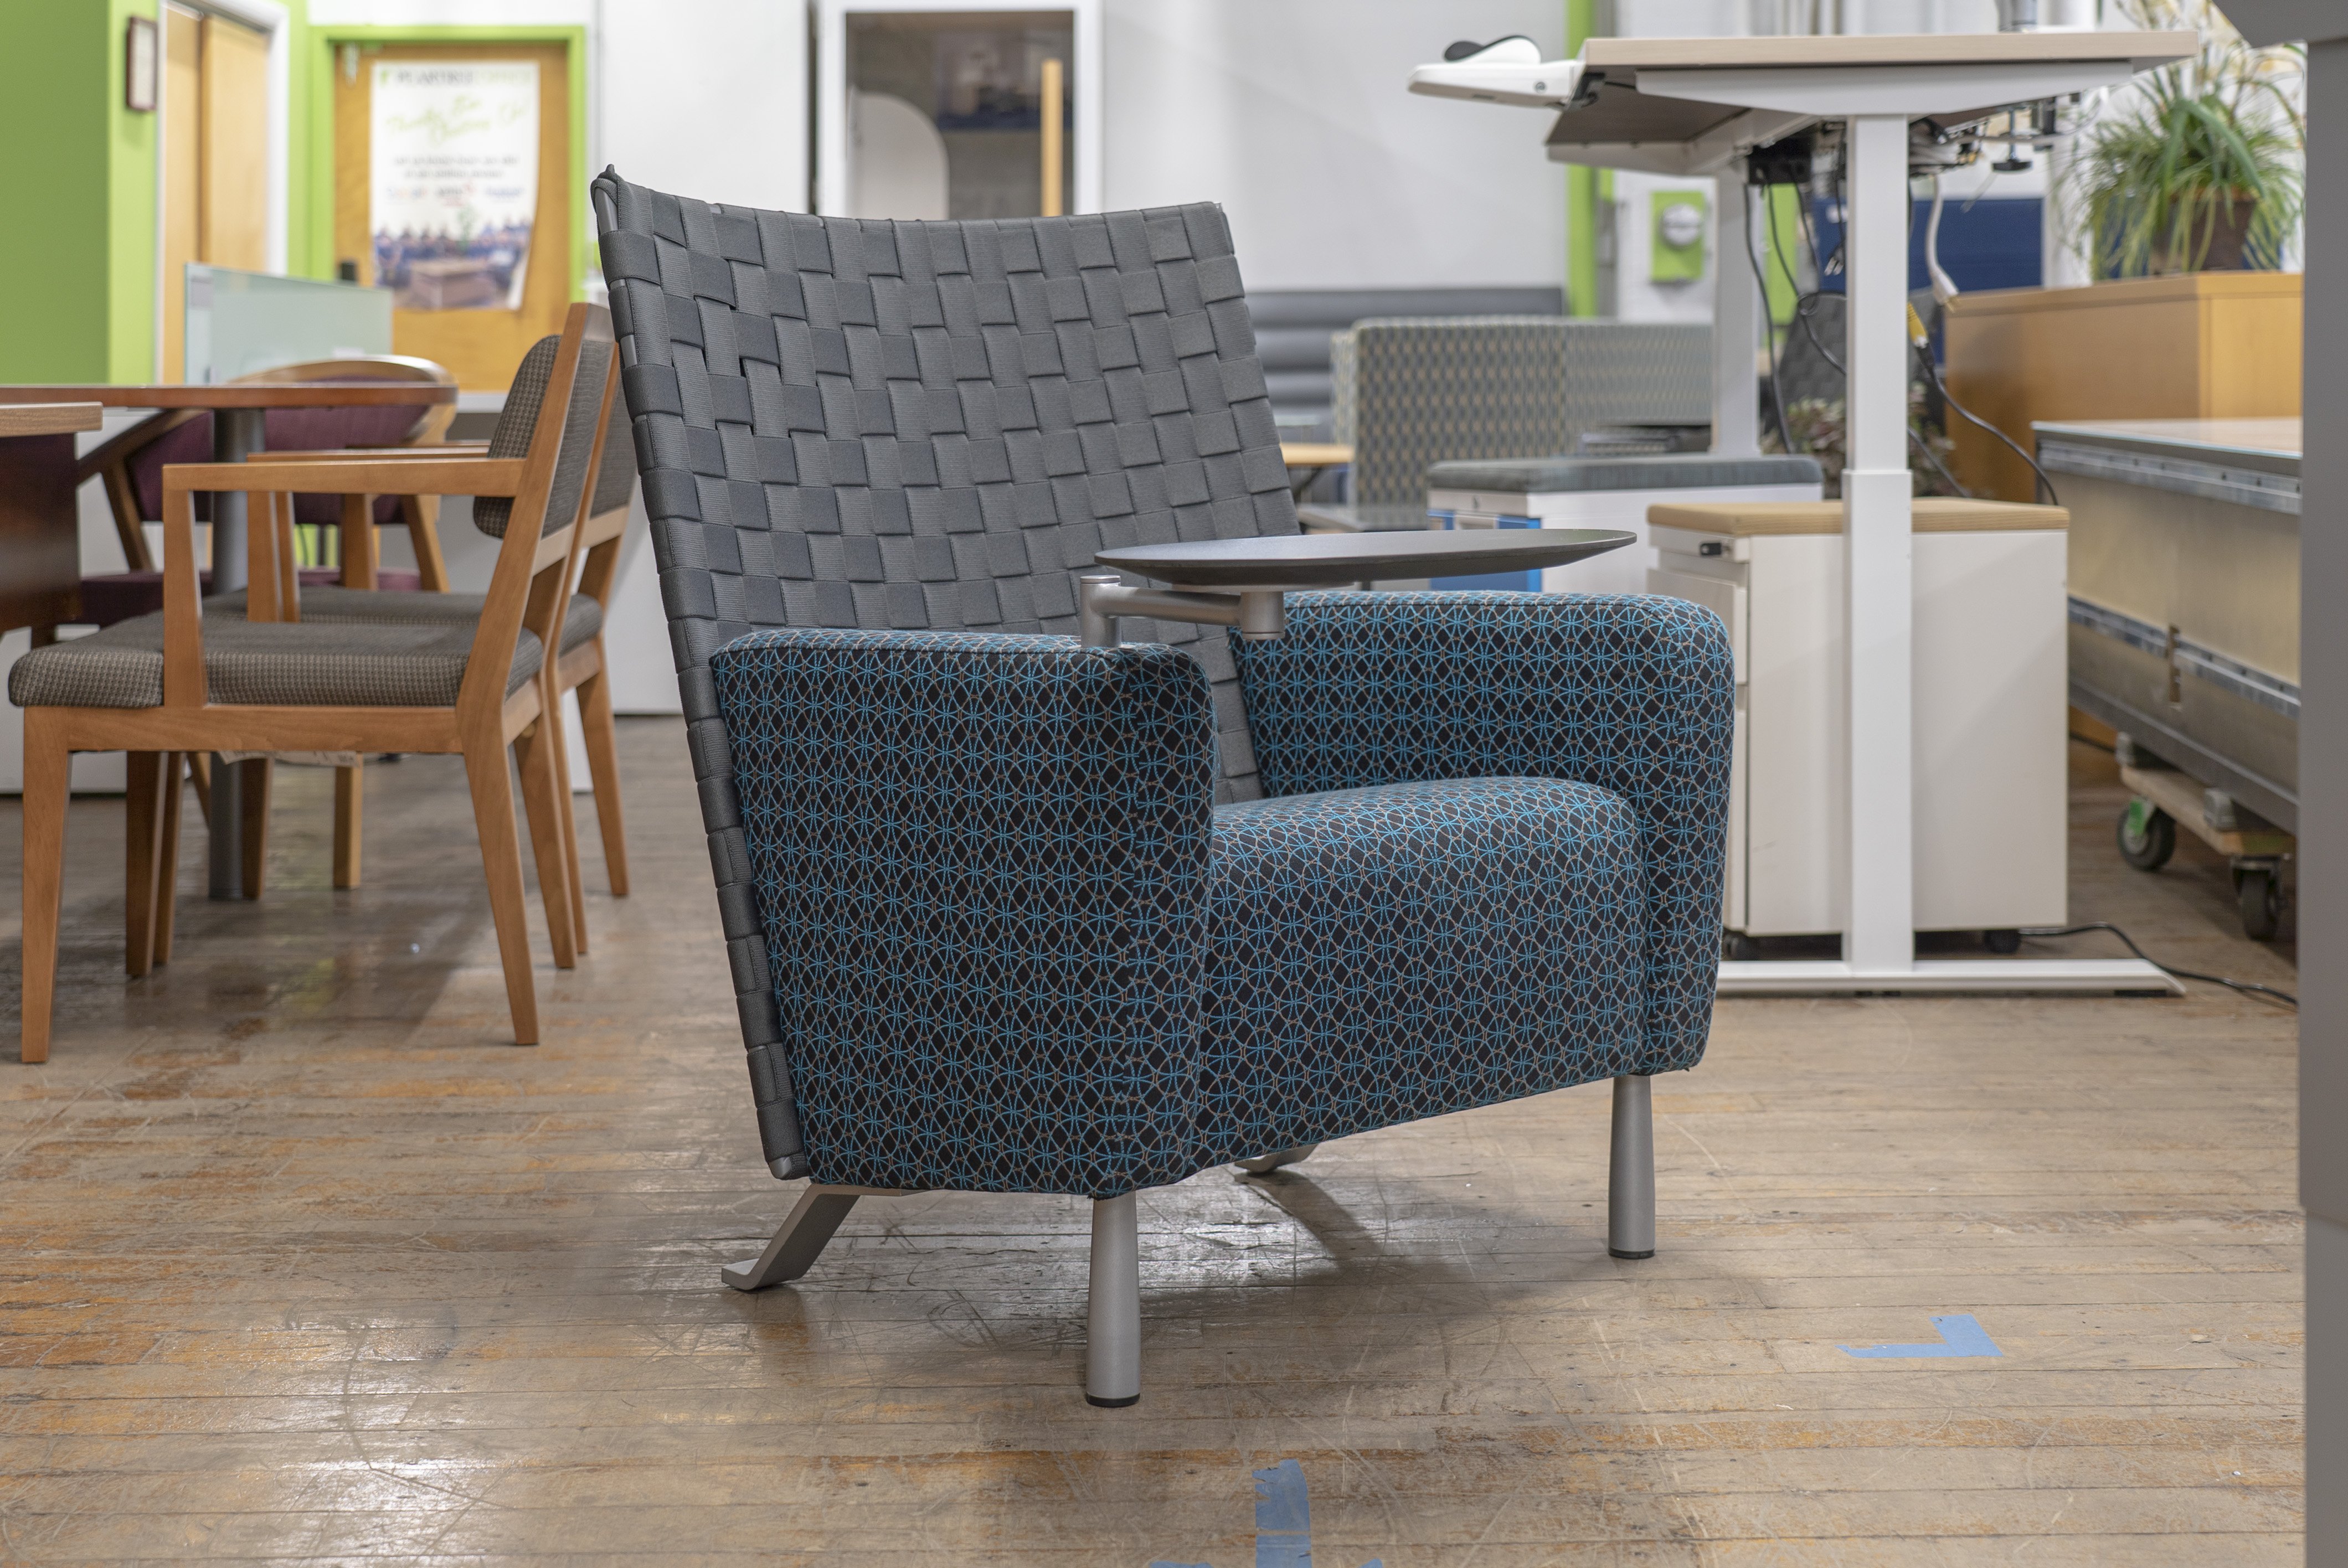 davis-webb-lounge-chairs-with-tablets